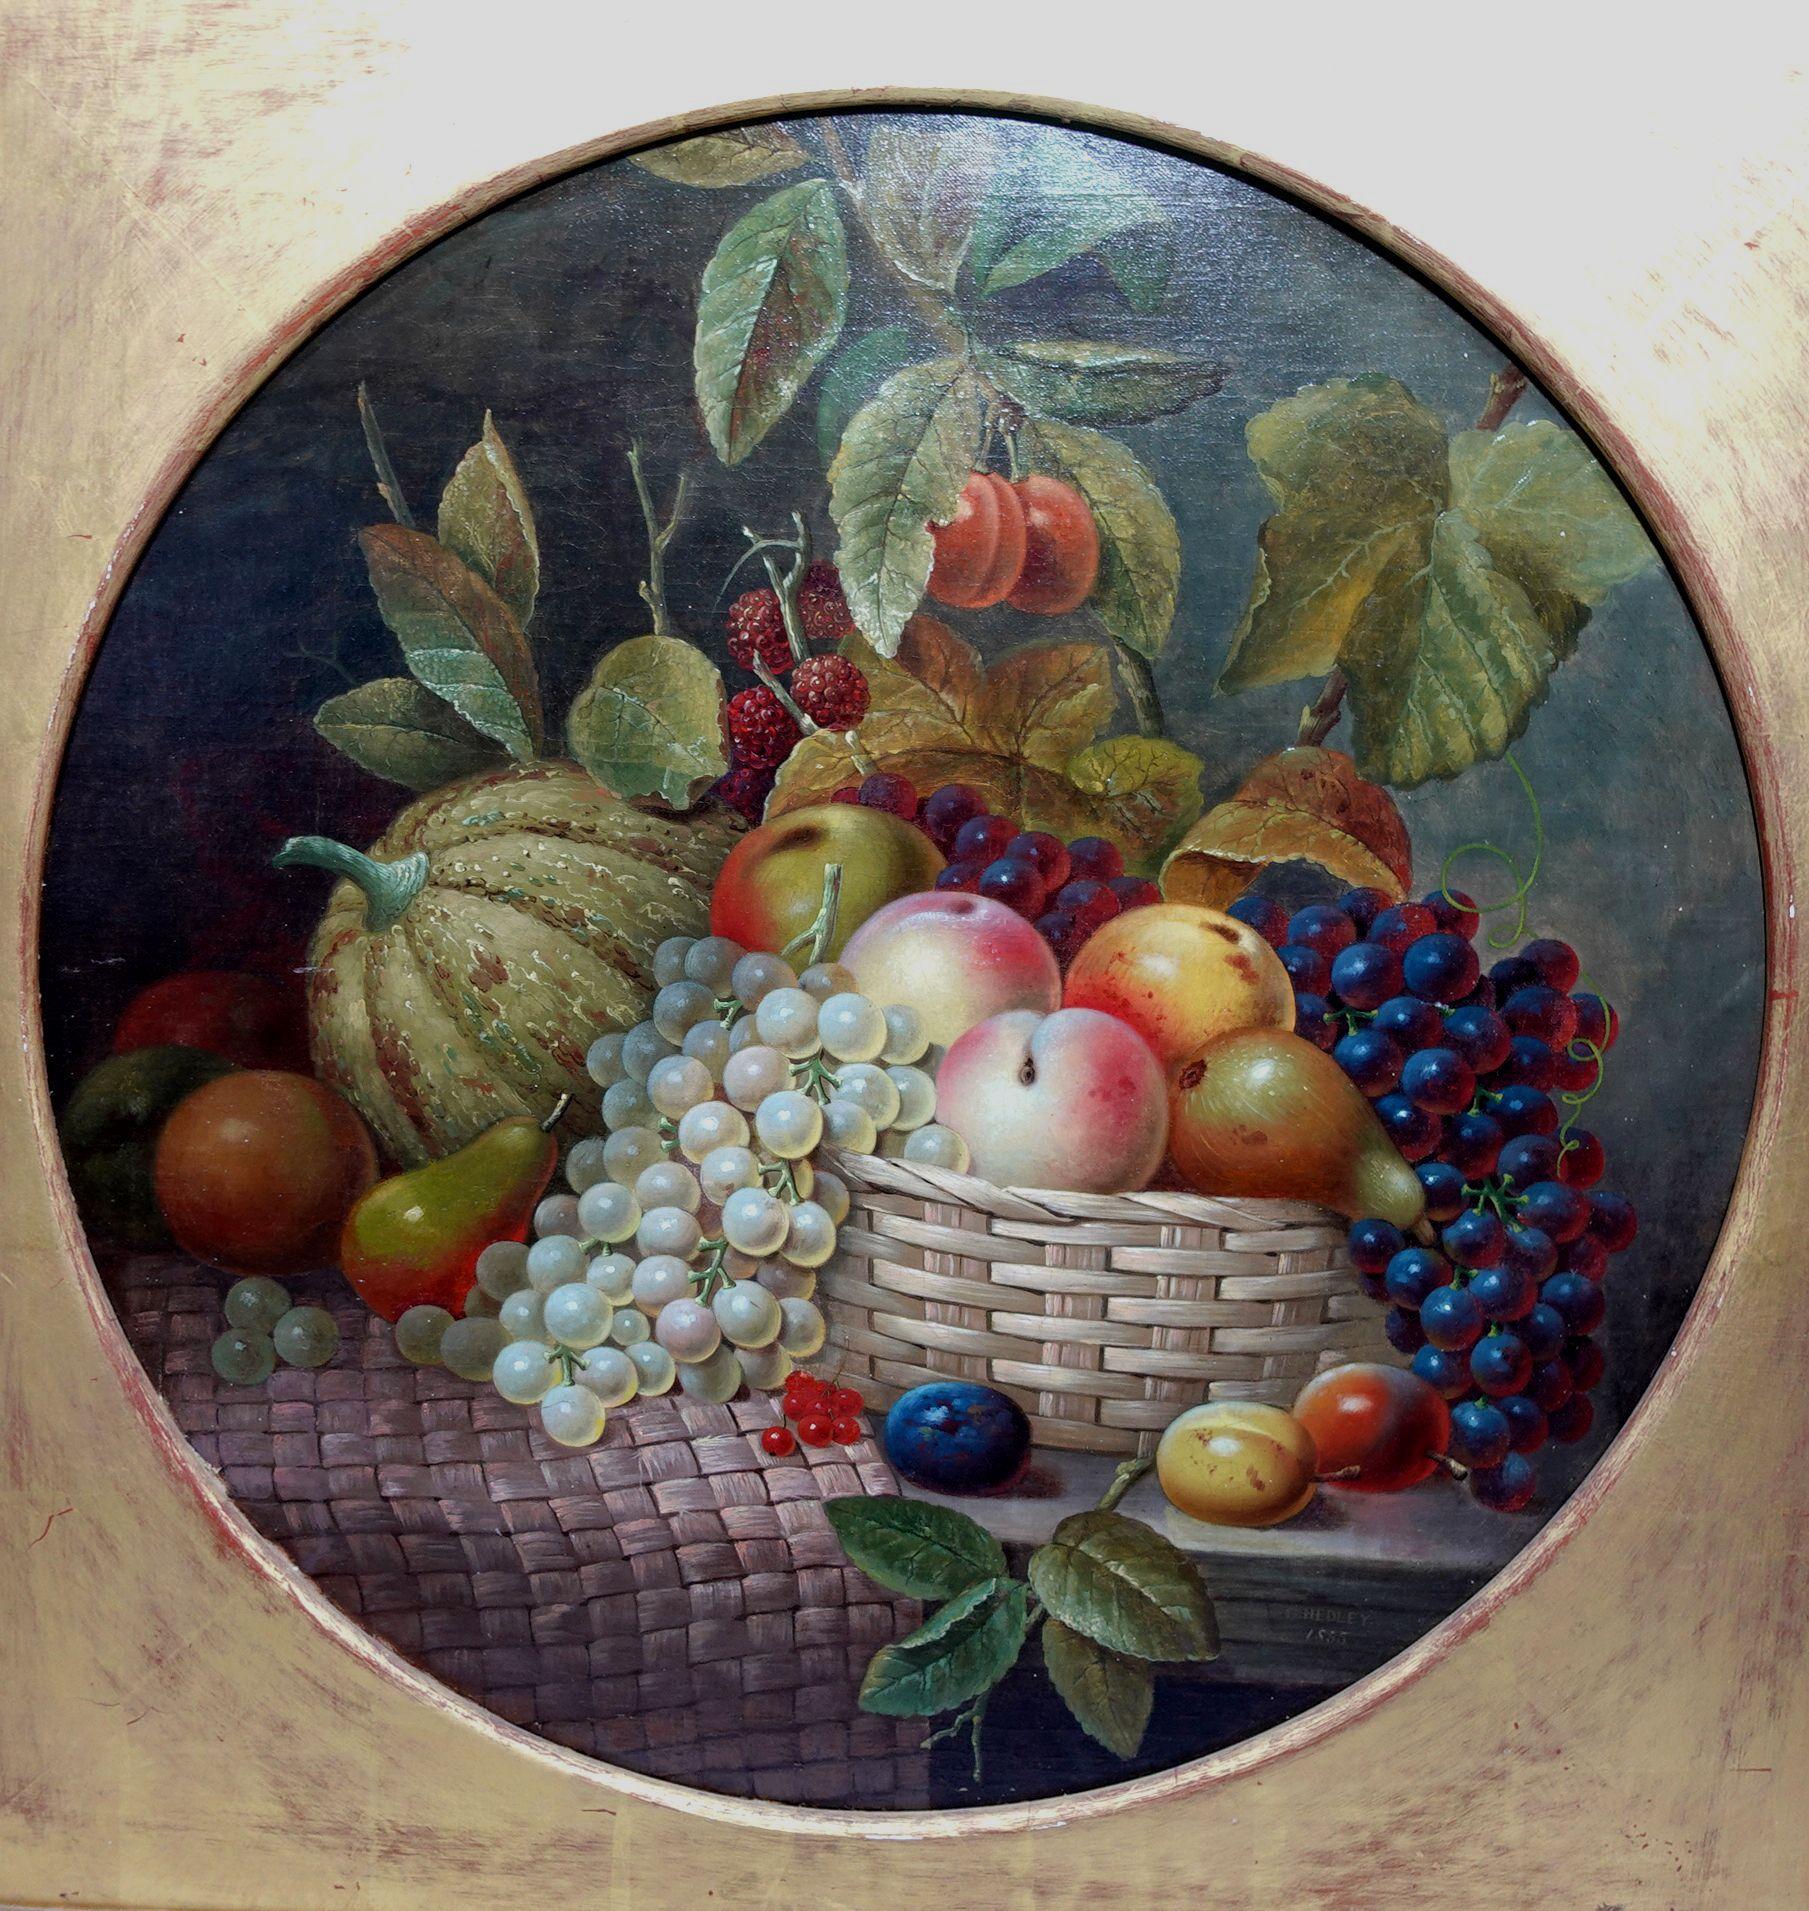 George Hedley (British), 1855
Still Life with Fruit
signed 'G. HEDLEY / 1855' (lower right) oil on canvas
55 x 55 cm (21 5/8 x 21 5/8 in).
framed 74.5 x 74.5 x 4.5 cm. (29 1/3 x 29 1/3 x 1 4/5 in.)